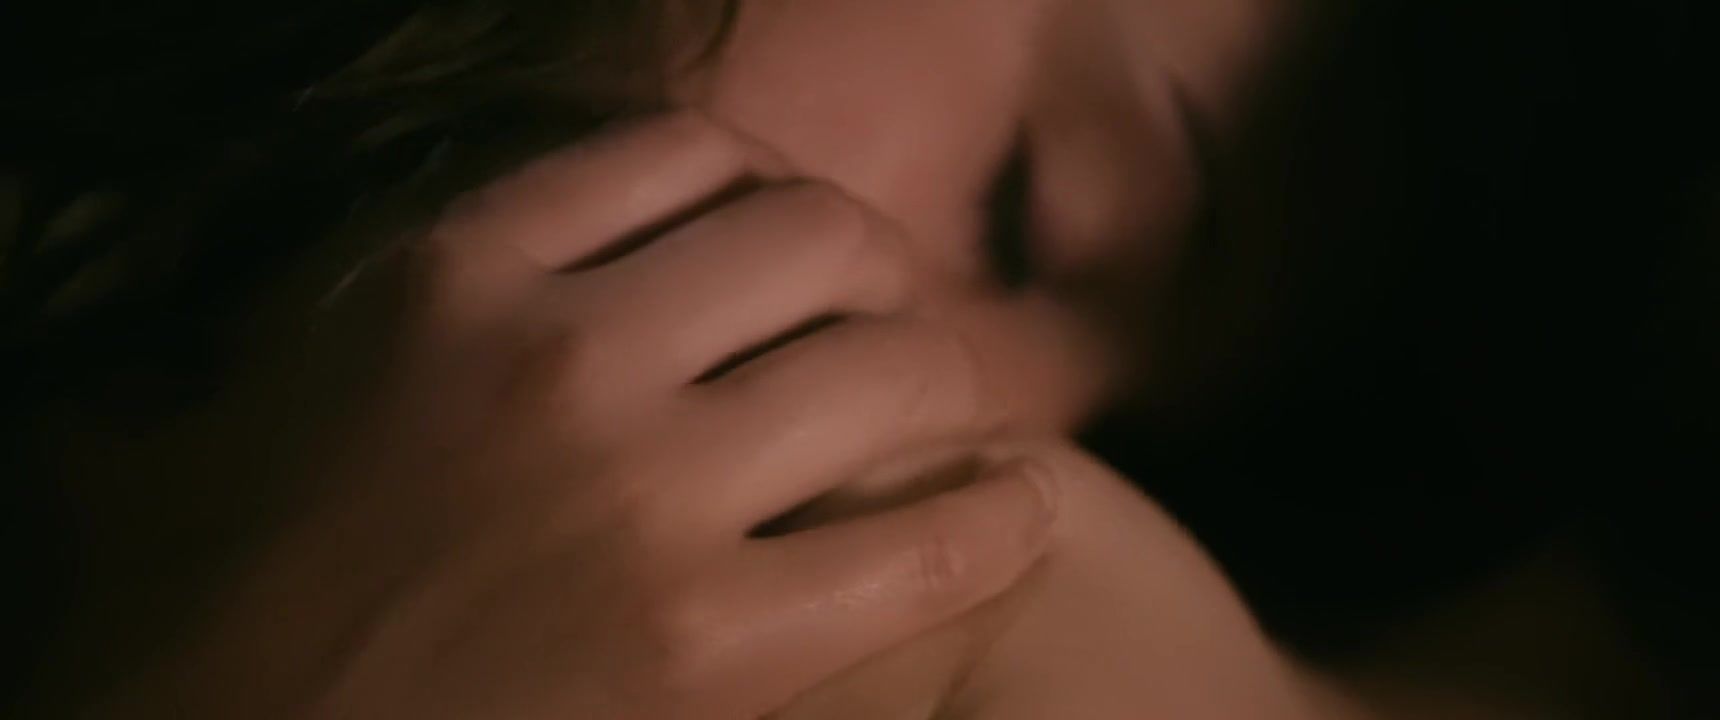 Pay French babe Adele Exarchopoulos and older actress Lea Seydoux nail in sex compilation C.urvy